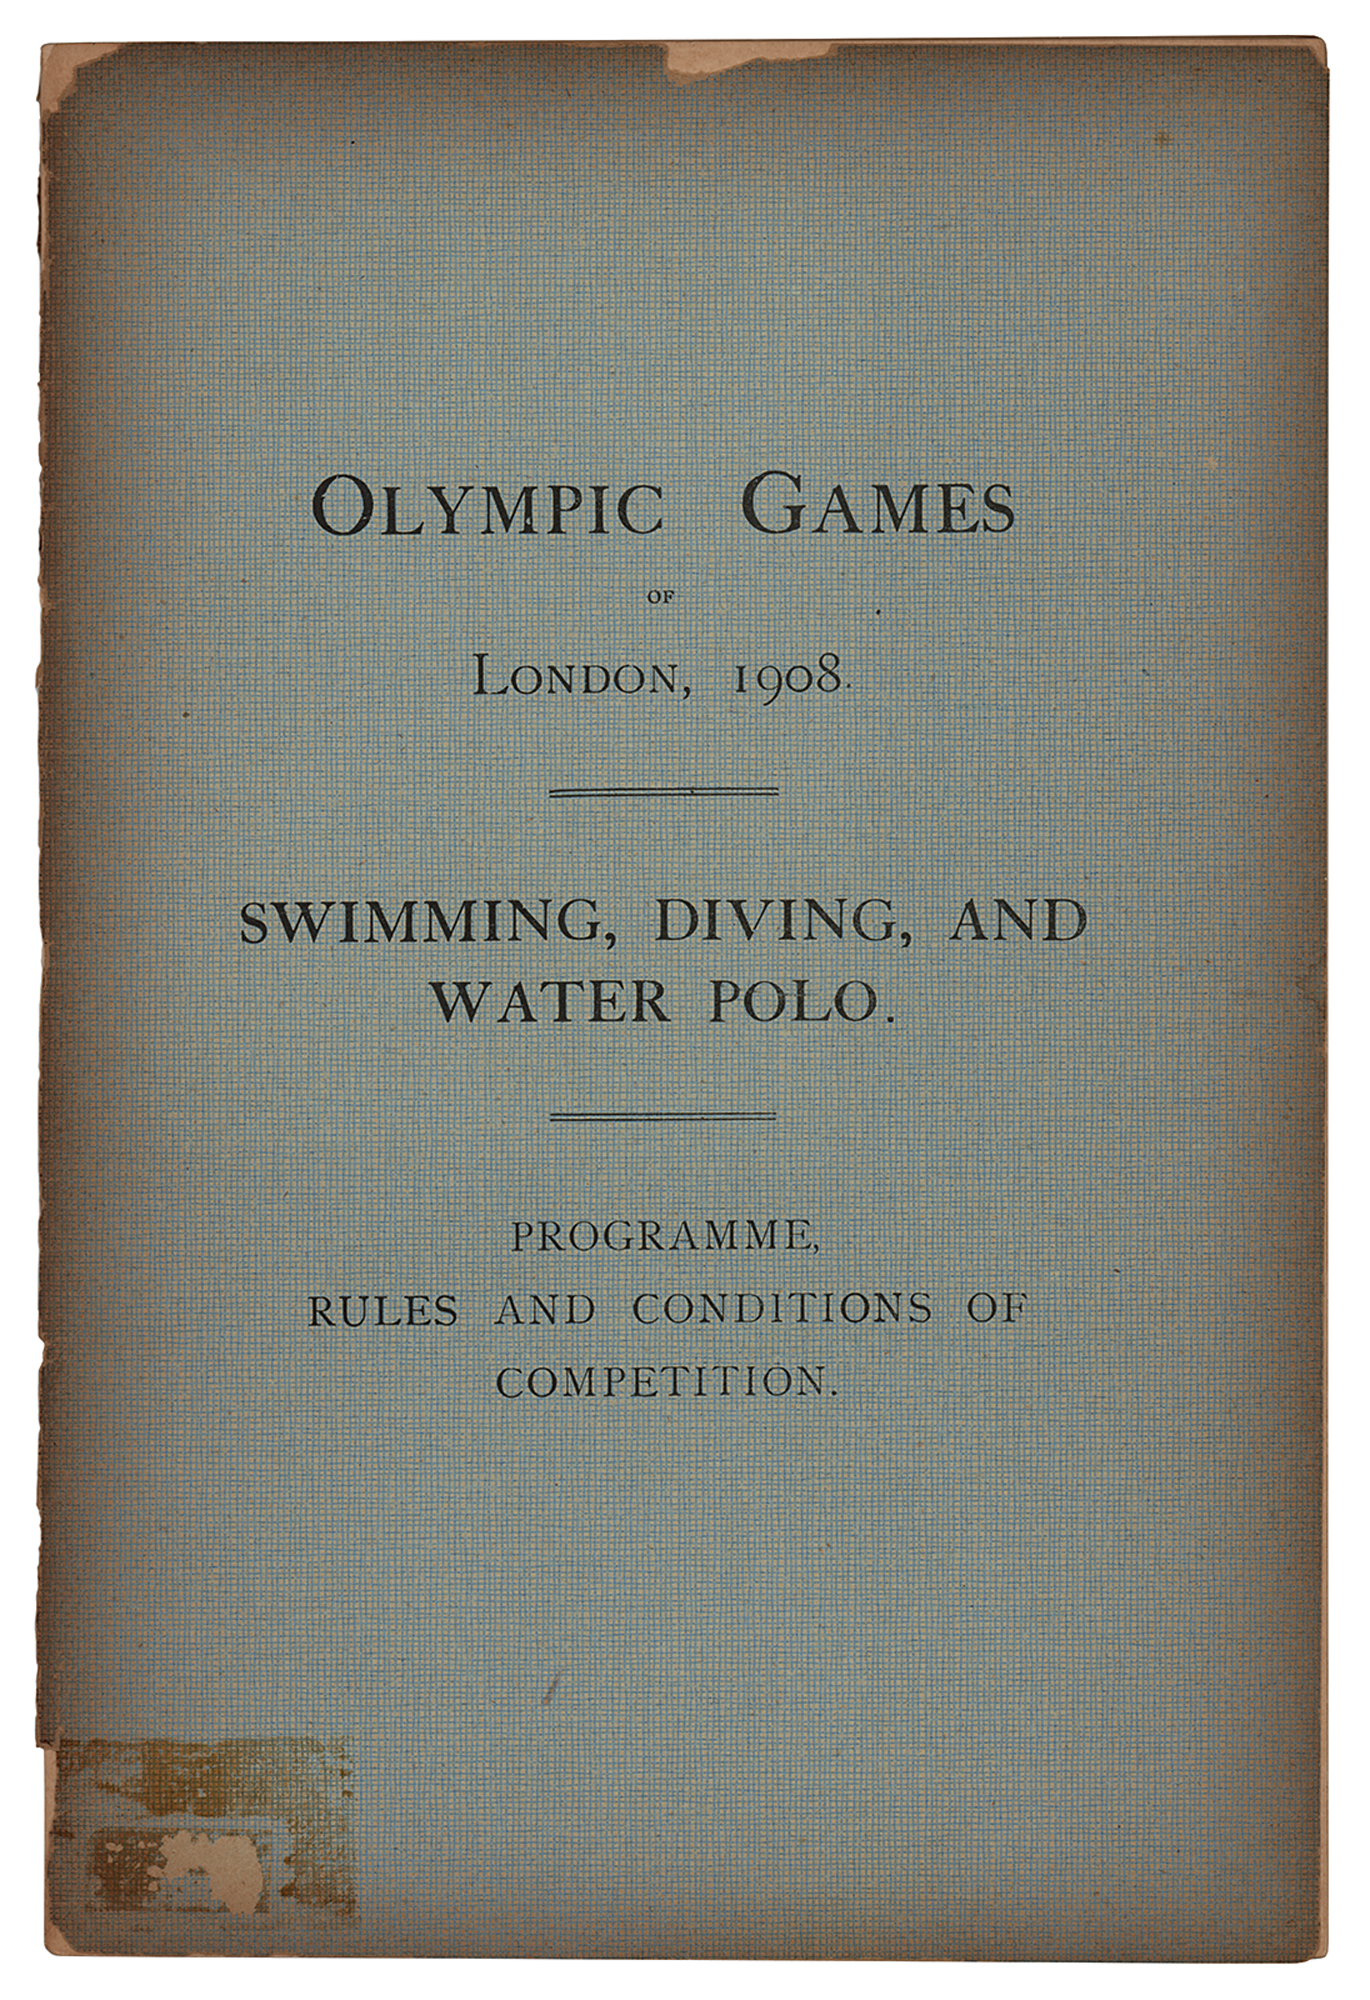 Lot #4253 London 1908 Olympics Swimming Rules and Conditions Program